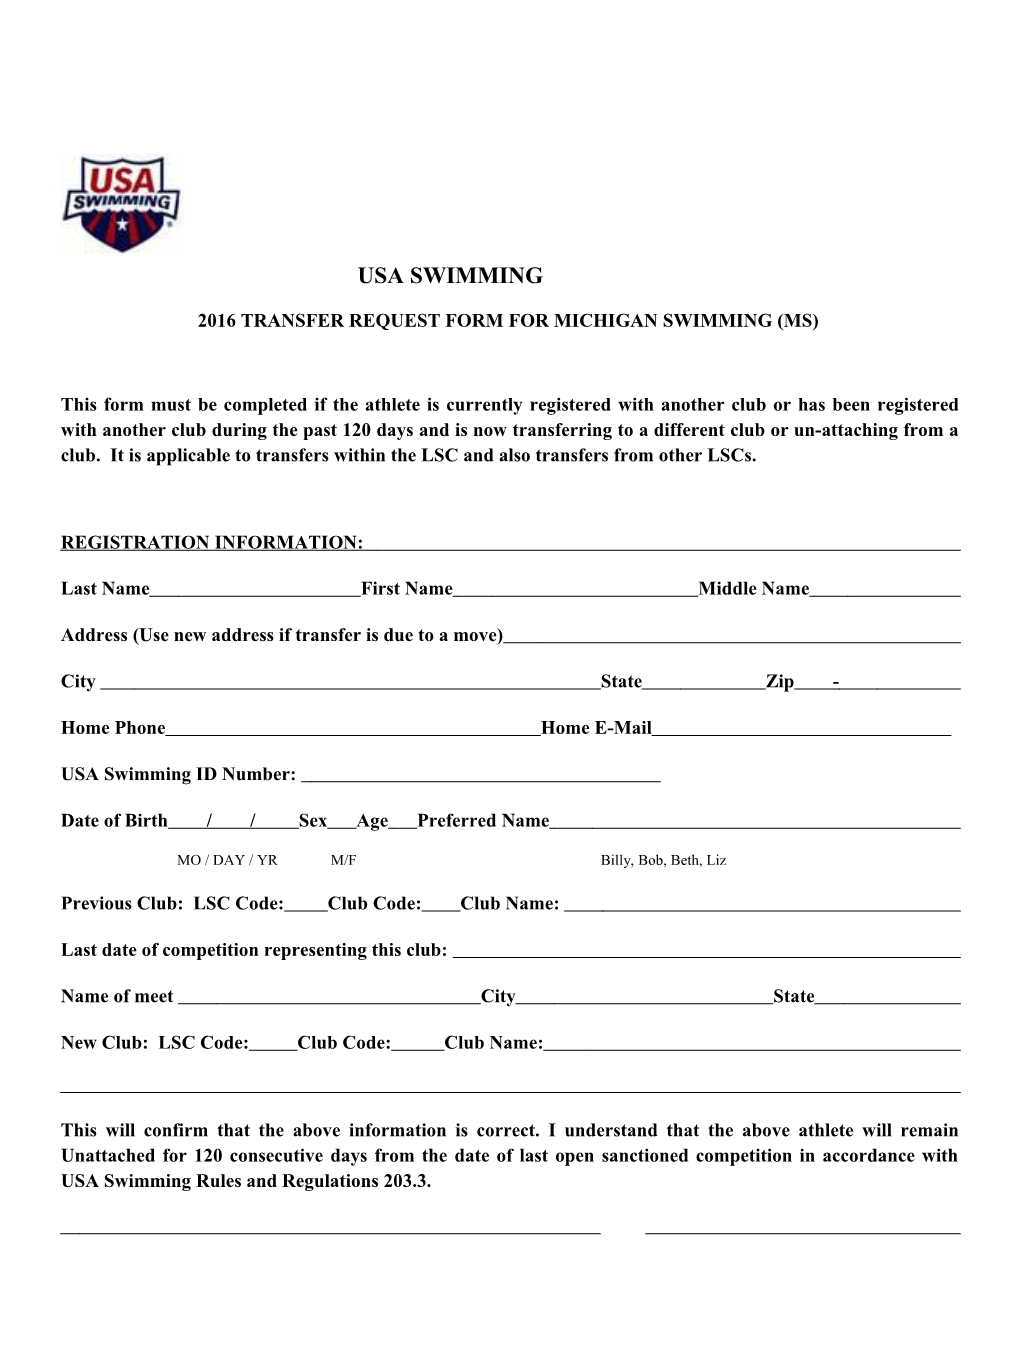 2016 Transfer Request Form for Michigan Swimming (Ms)